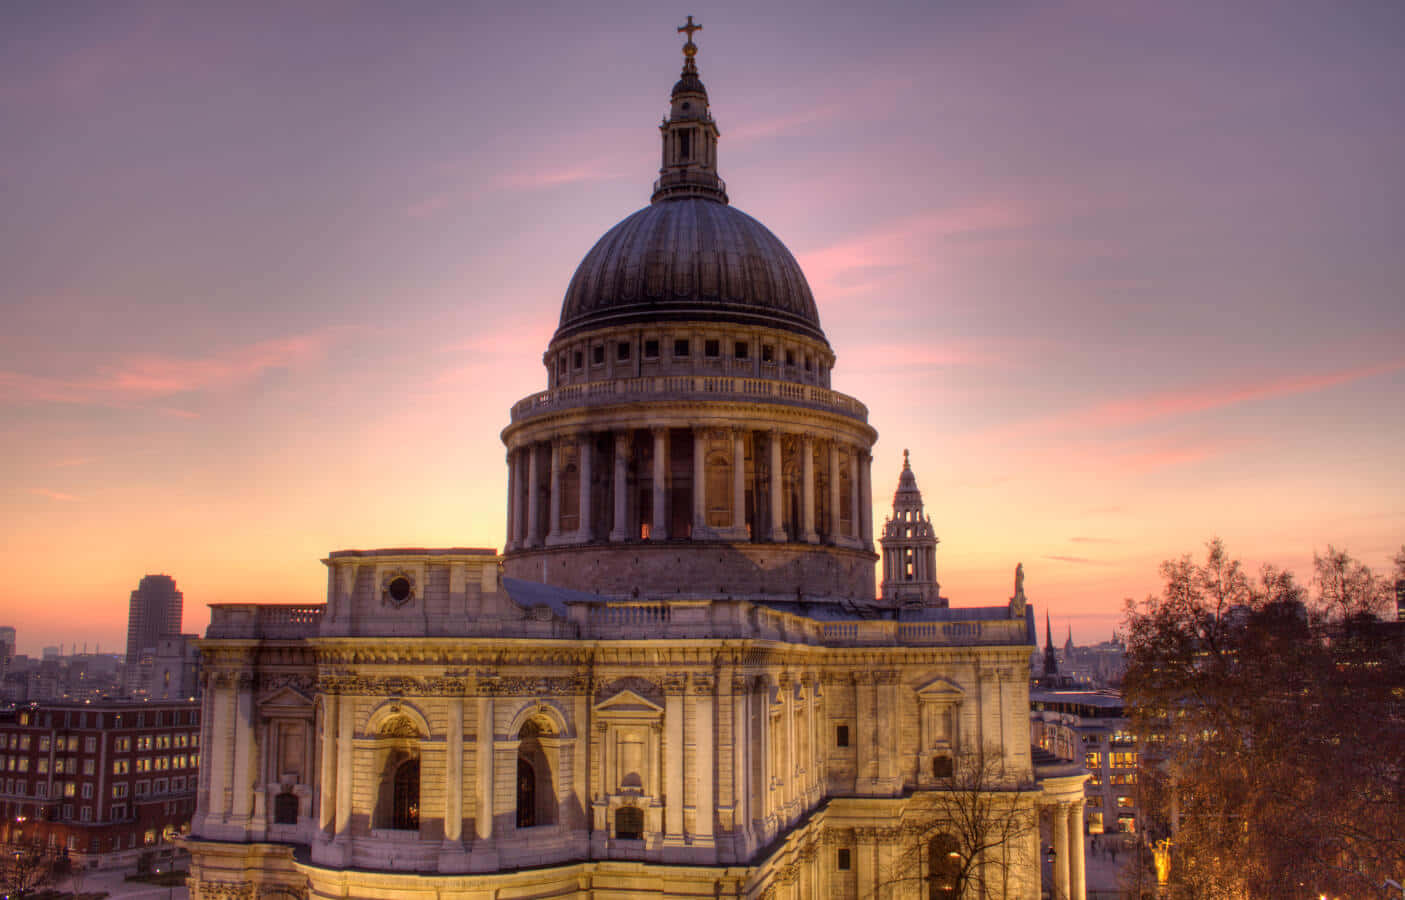 Minimalist St. Paul's Cathedral Sunset View Wallpaper